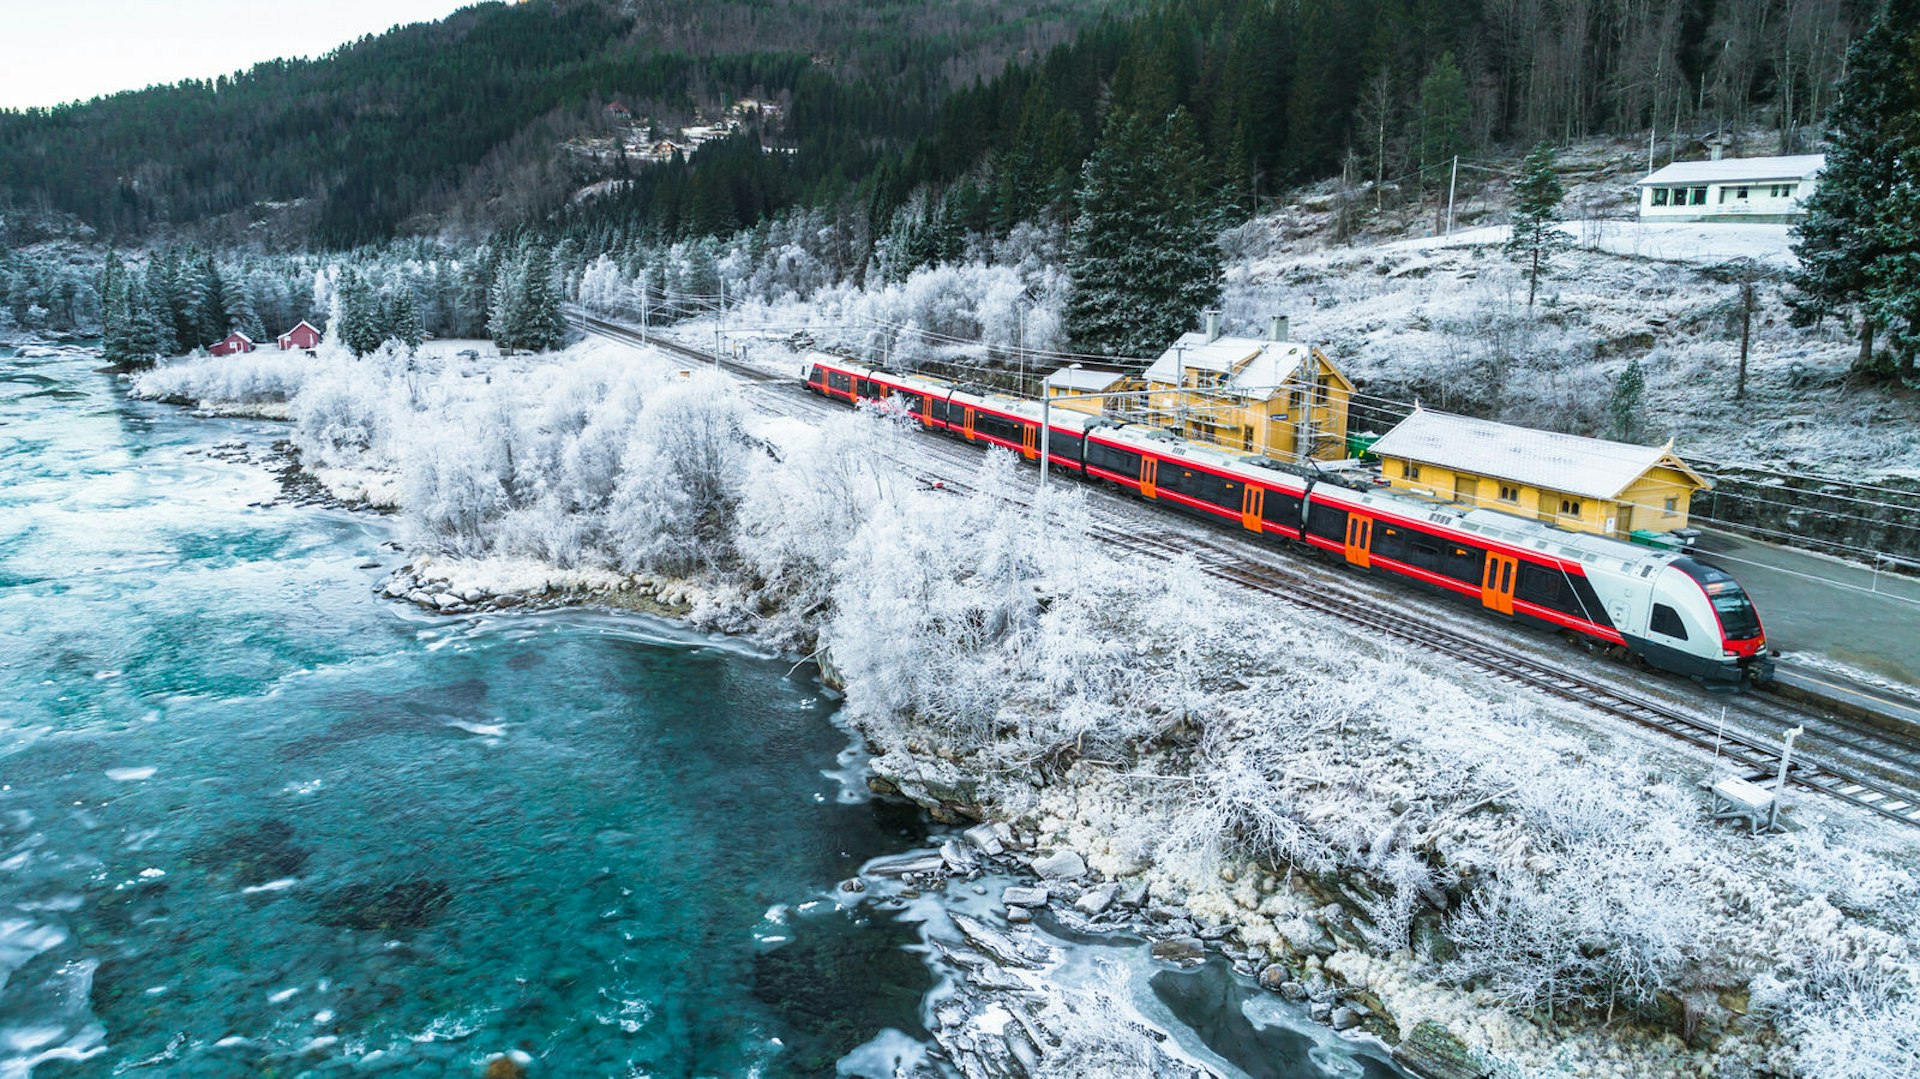 A red train travels through snowy surrounds